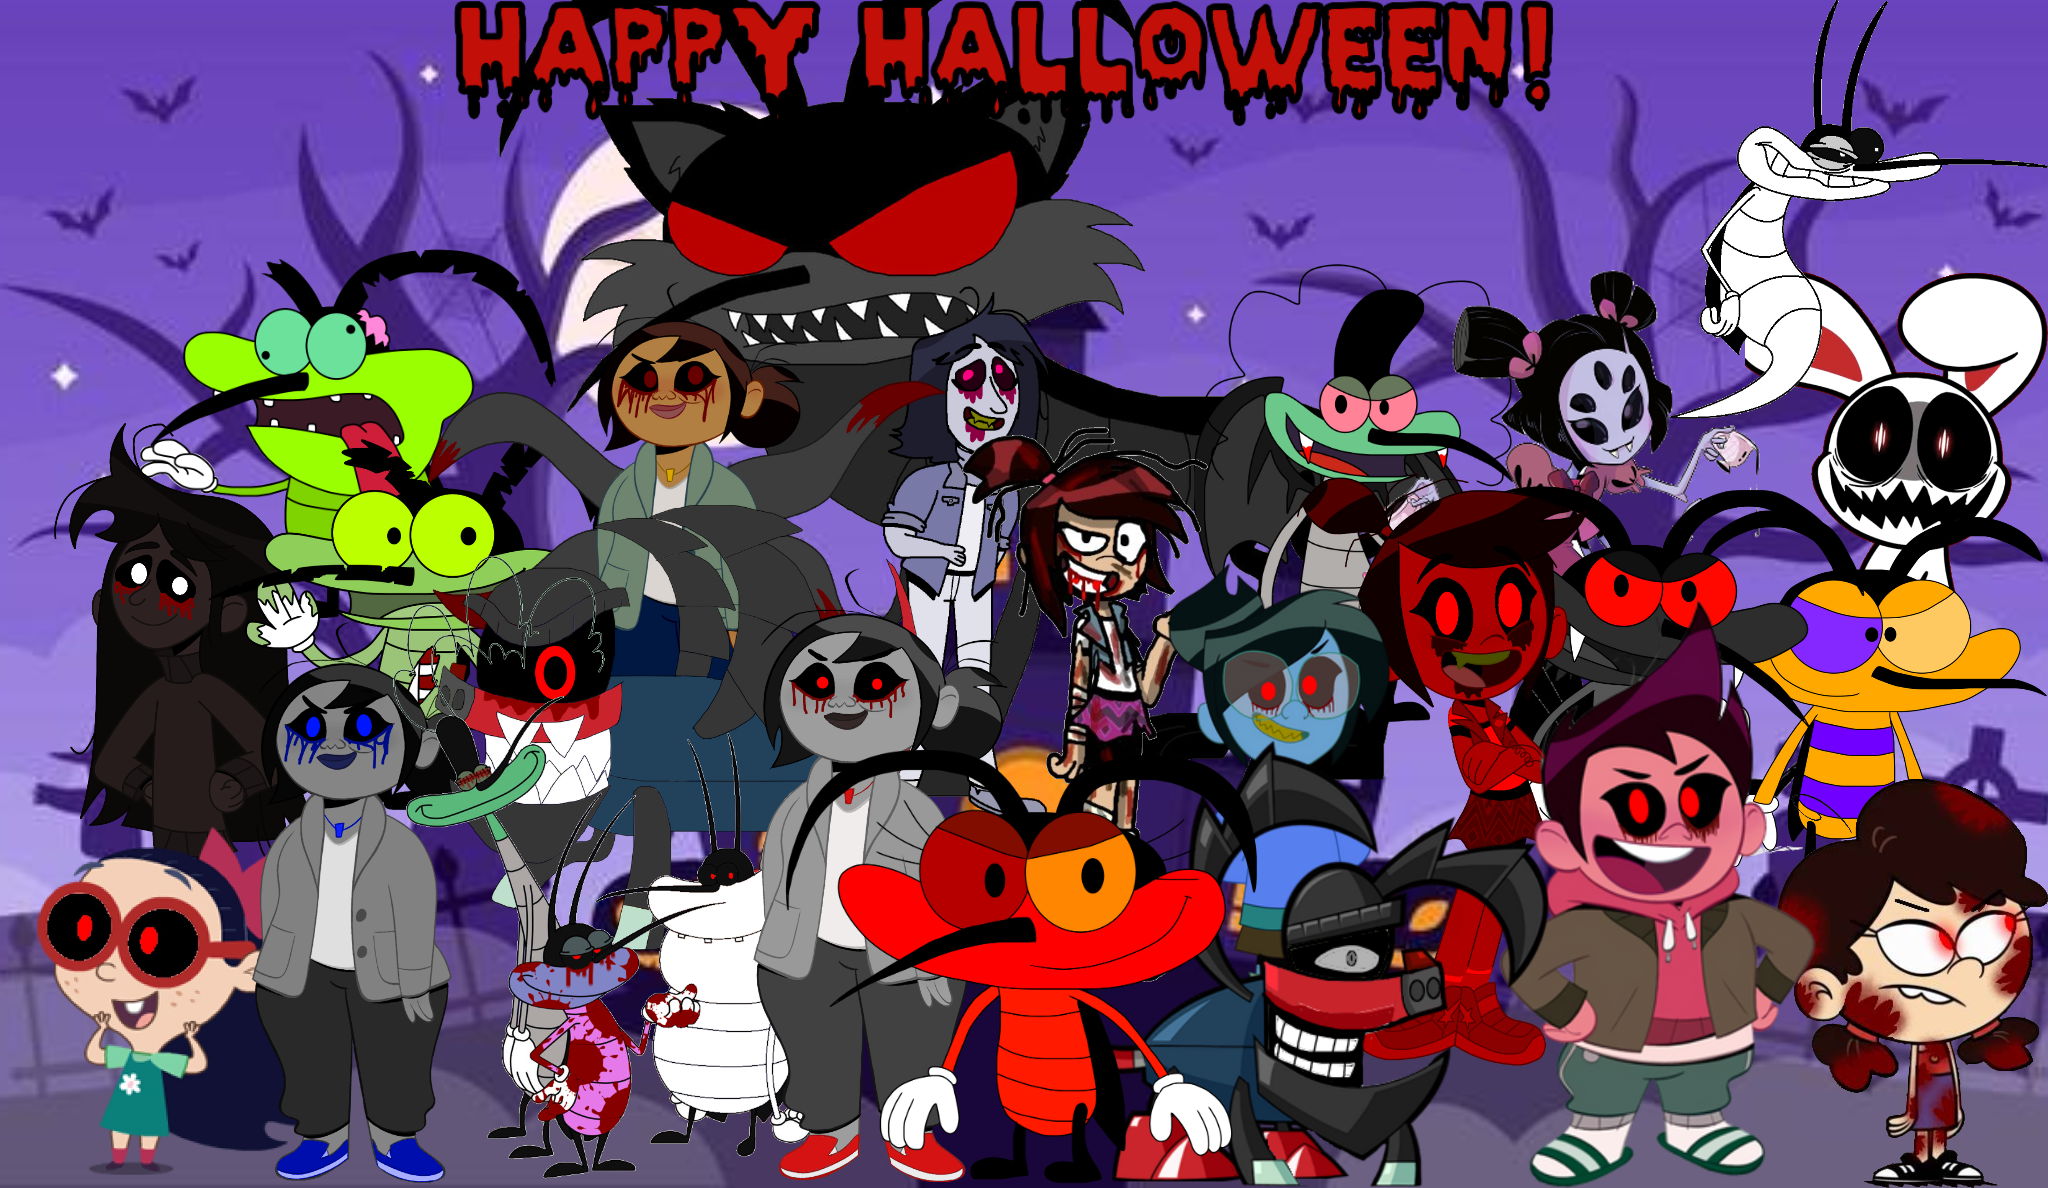 HAPPY HALLOWEEN FROM THE EPIC ROVIOGUY 2023! by RovioGuy2022 on DeviantArt